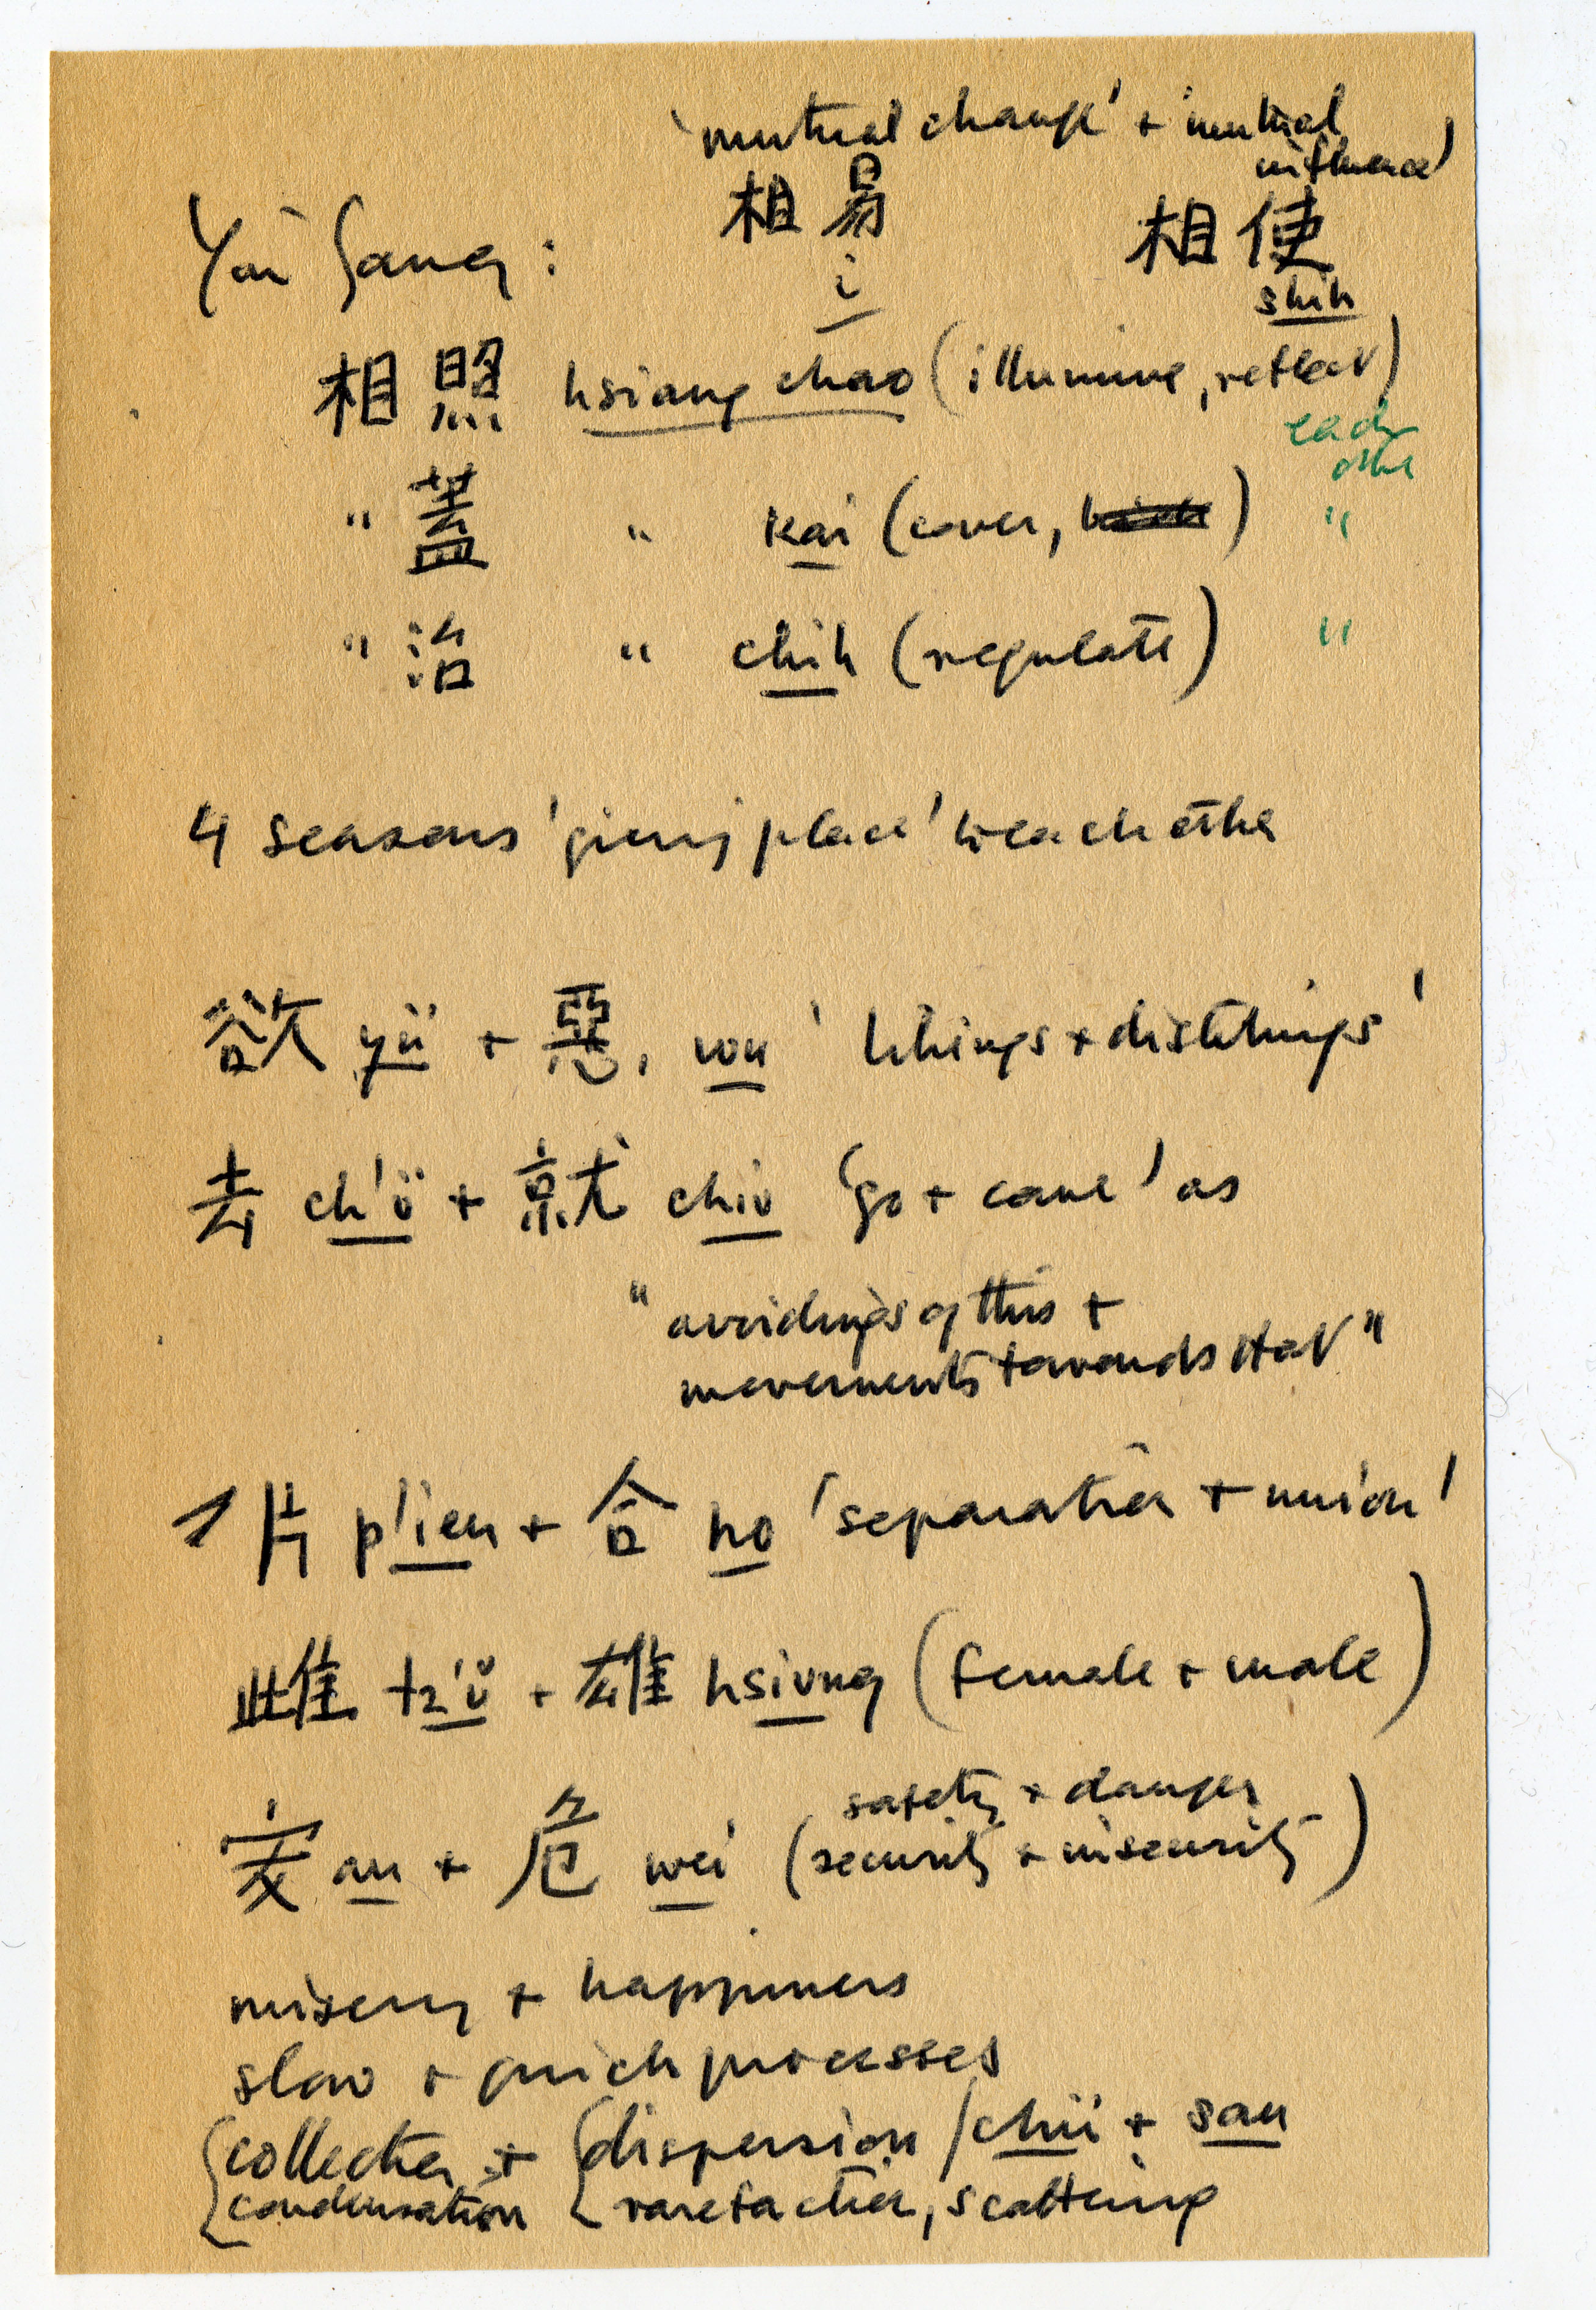 Mai-mai Sze’s notes on the concept of yin and yang, in Chinese and English.